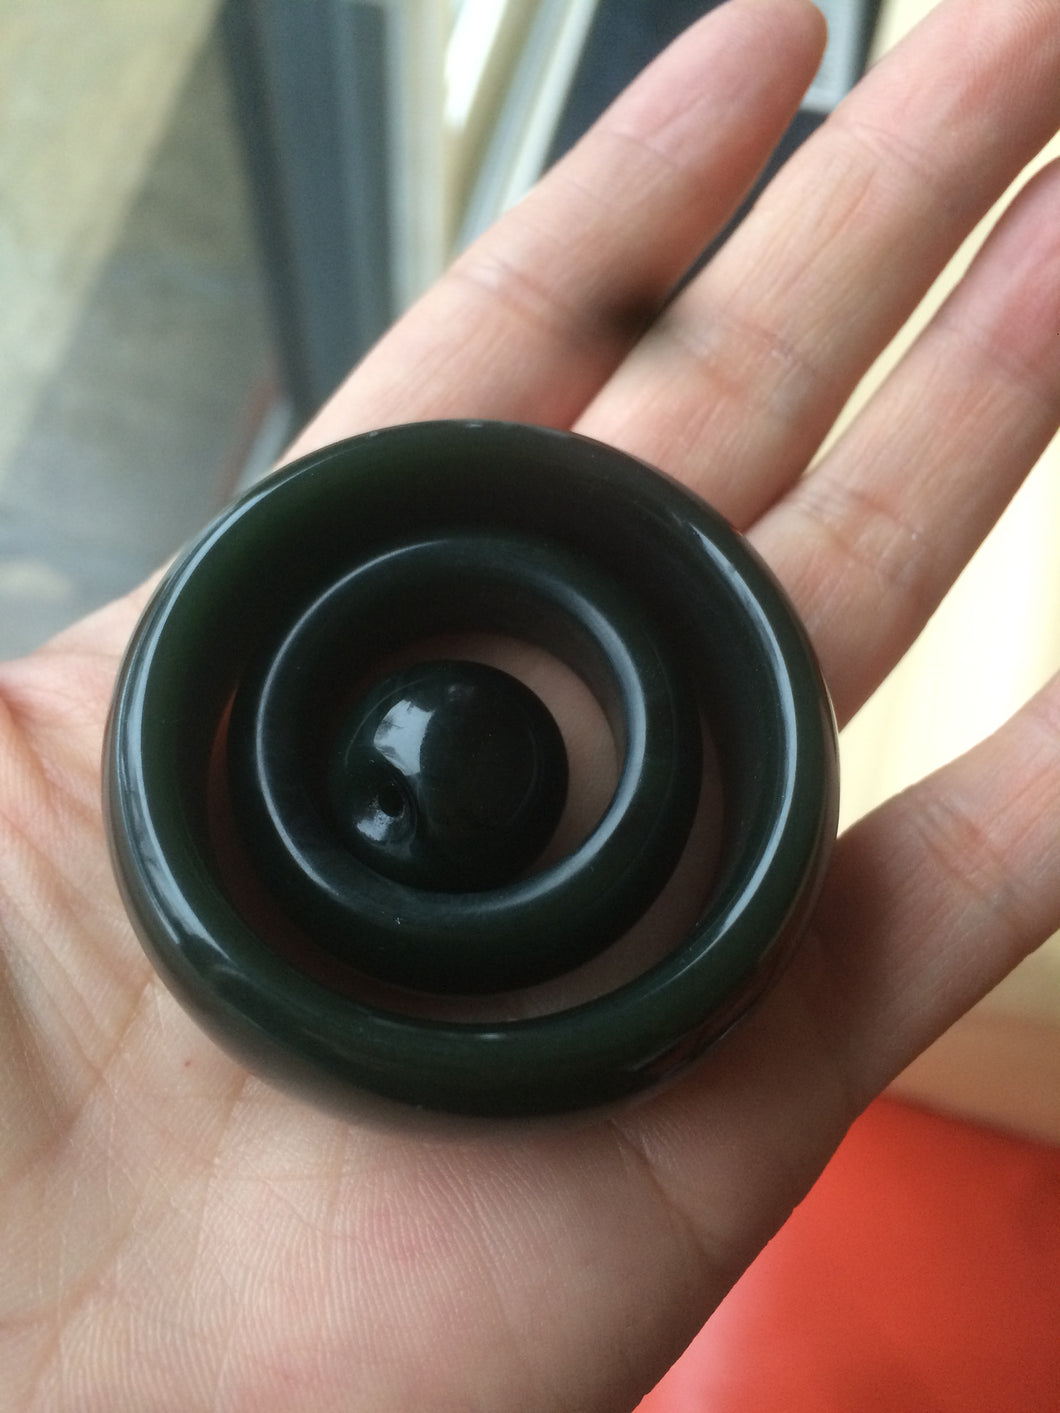 3 piece 100% Natural oily black/dark green nephrite Hetian jade concentric circle safety Guardian ring Pendant worry stone set N122